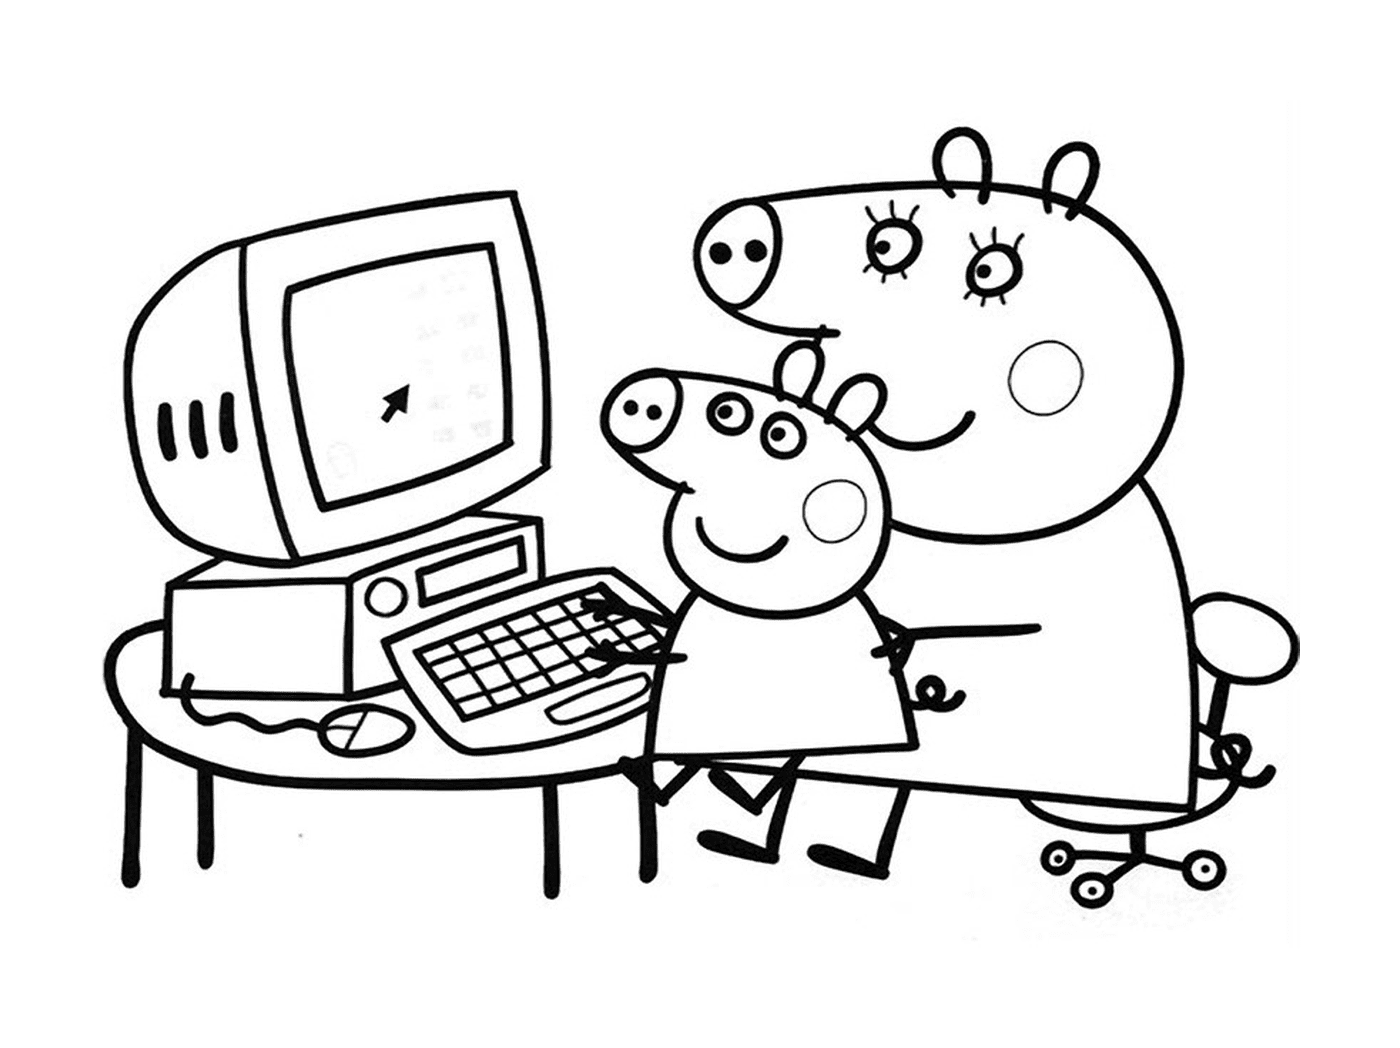  Peppa Pig and George Pig on the computer 